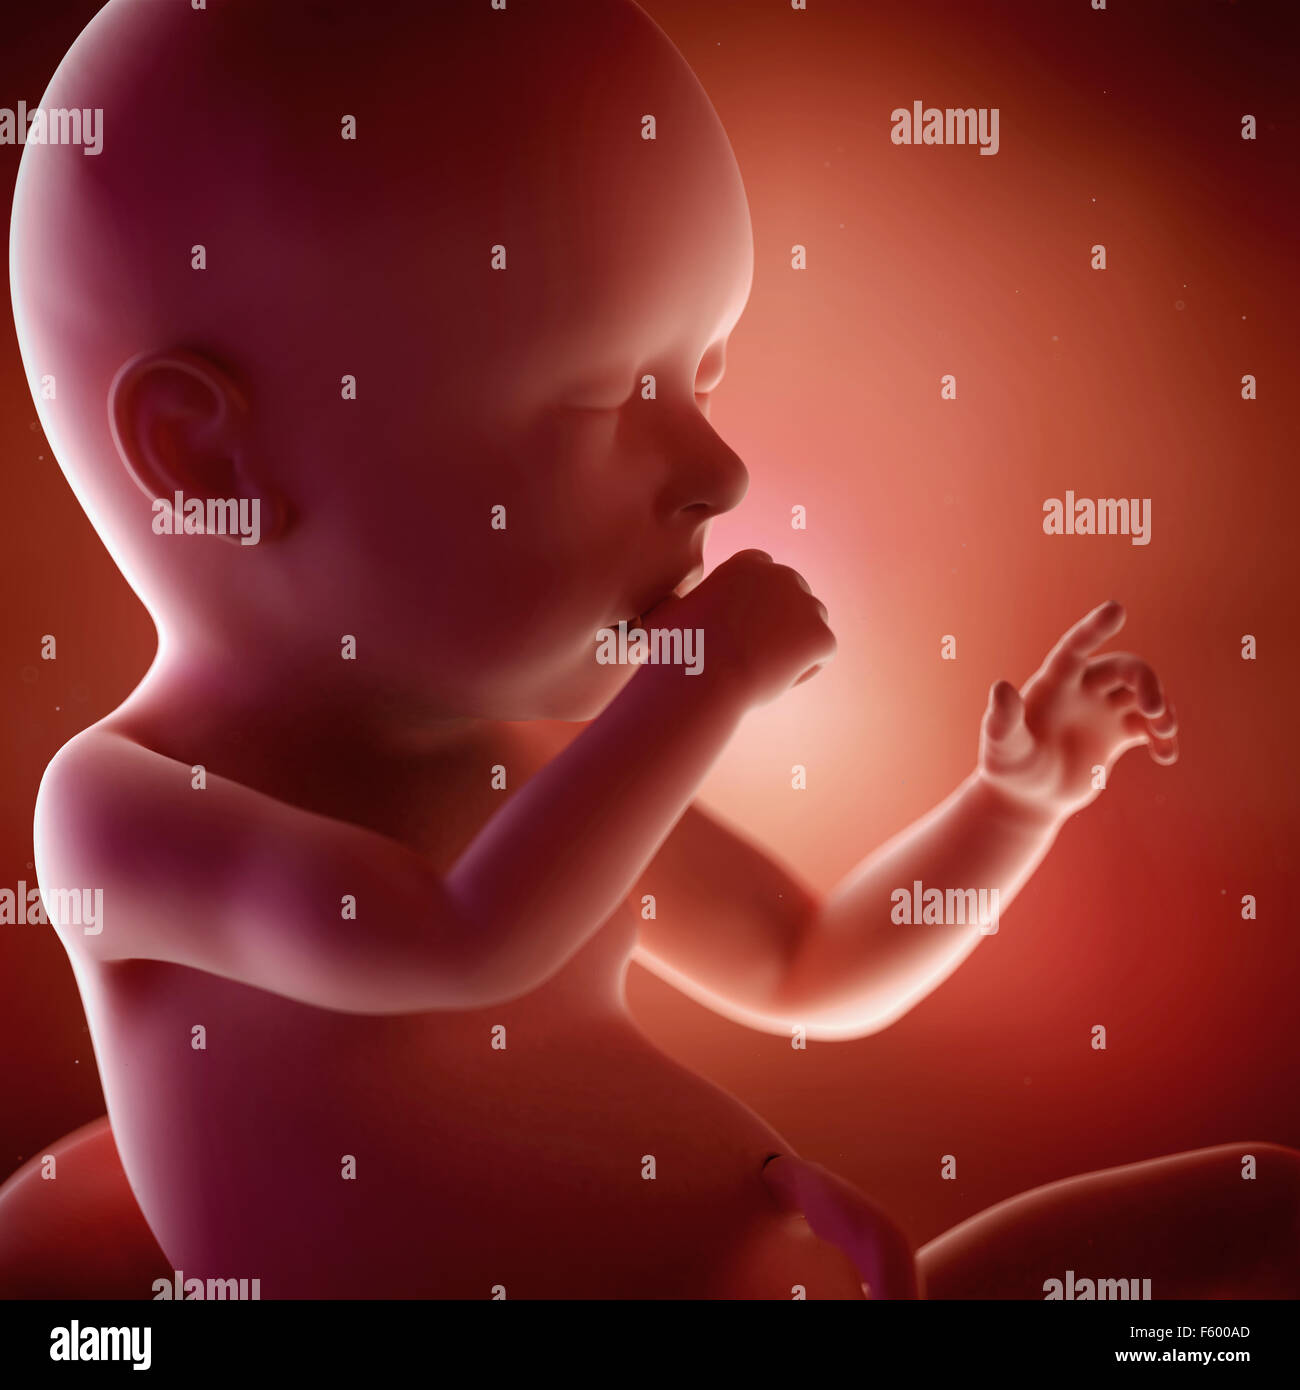 medical accurate 3d illustration of a fetus week 40 Stock Photo